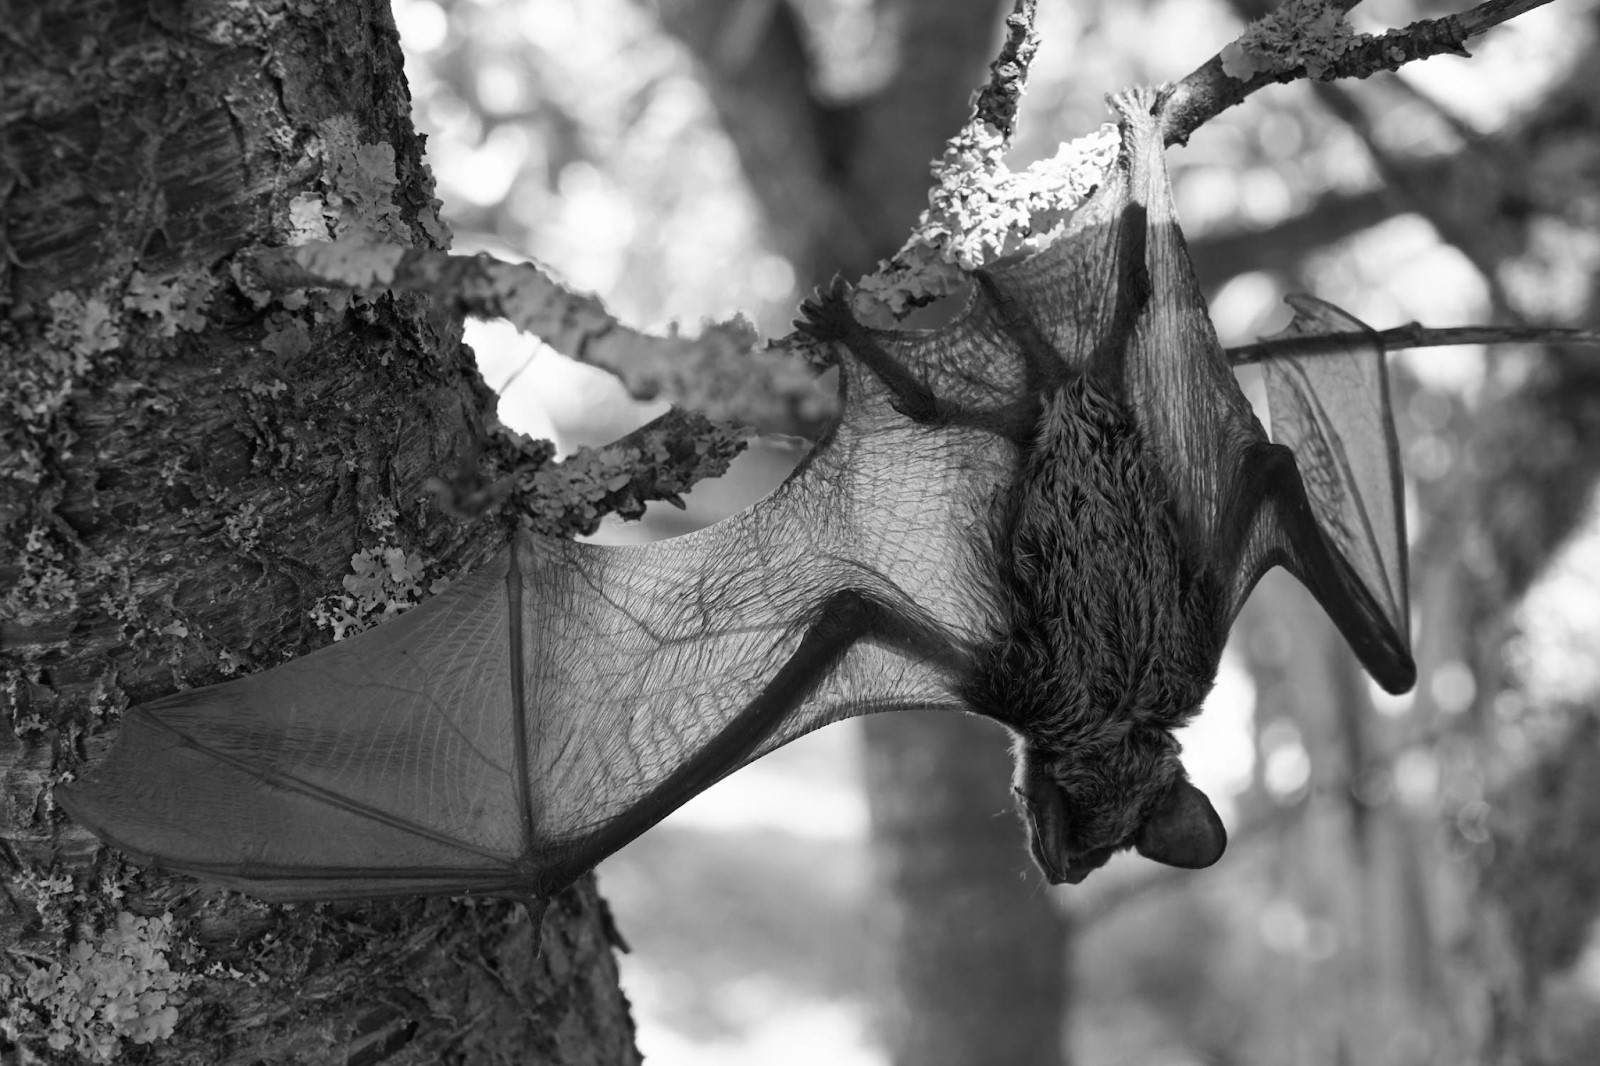 Grayscale Photo of a Bat Hanging on a Tree Branch